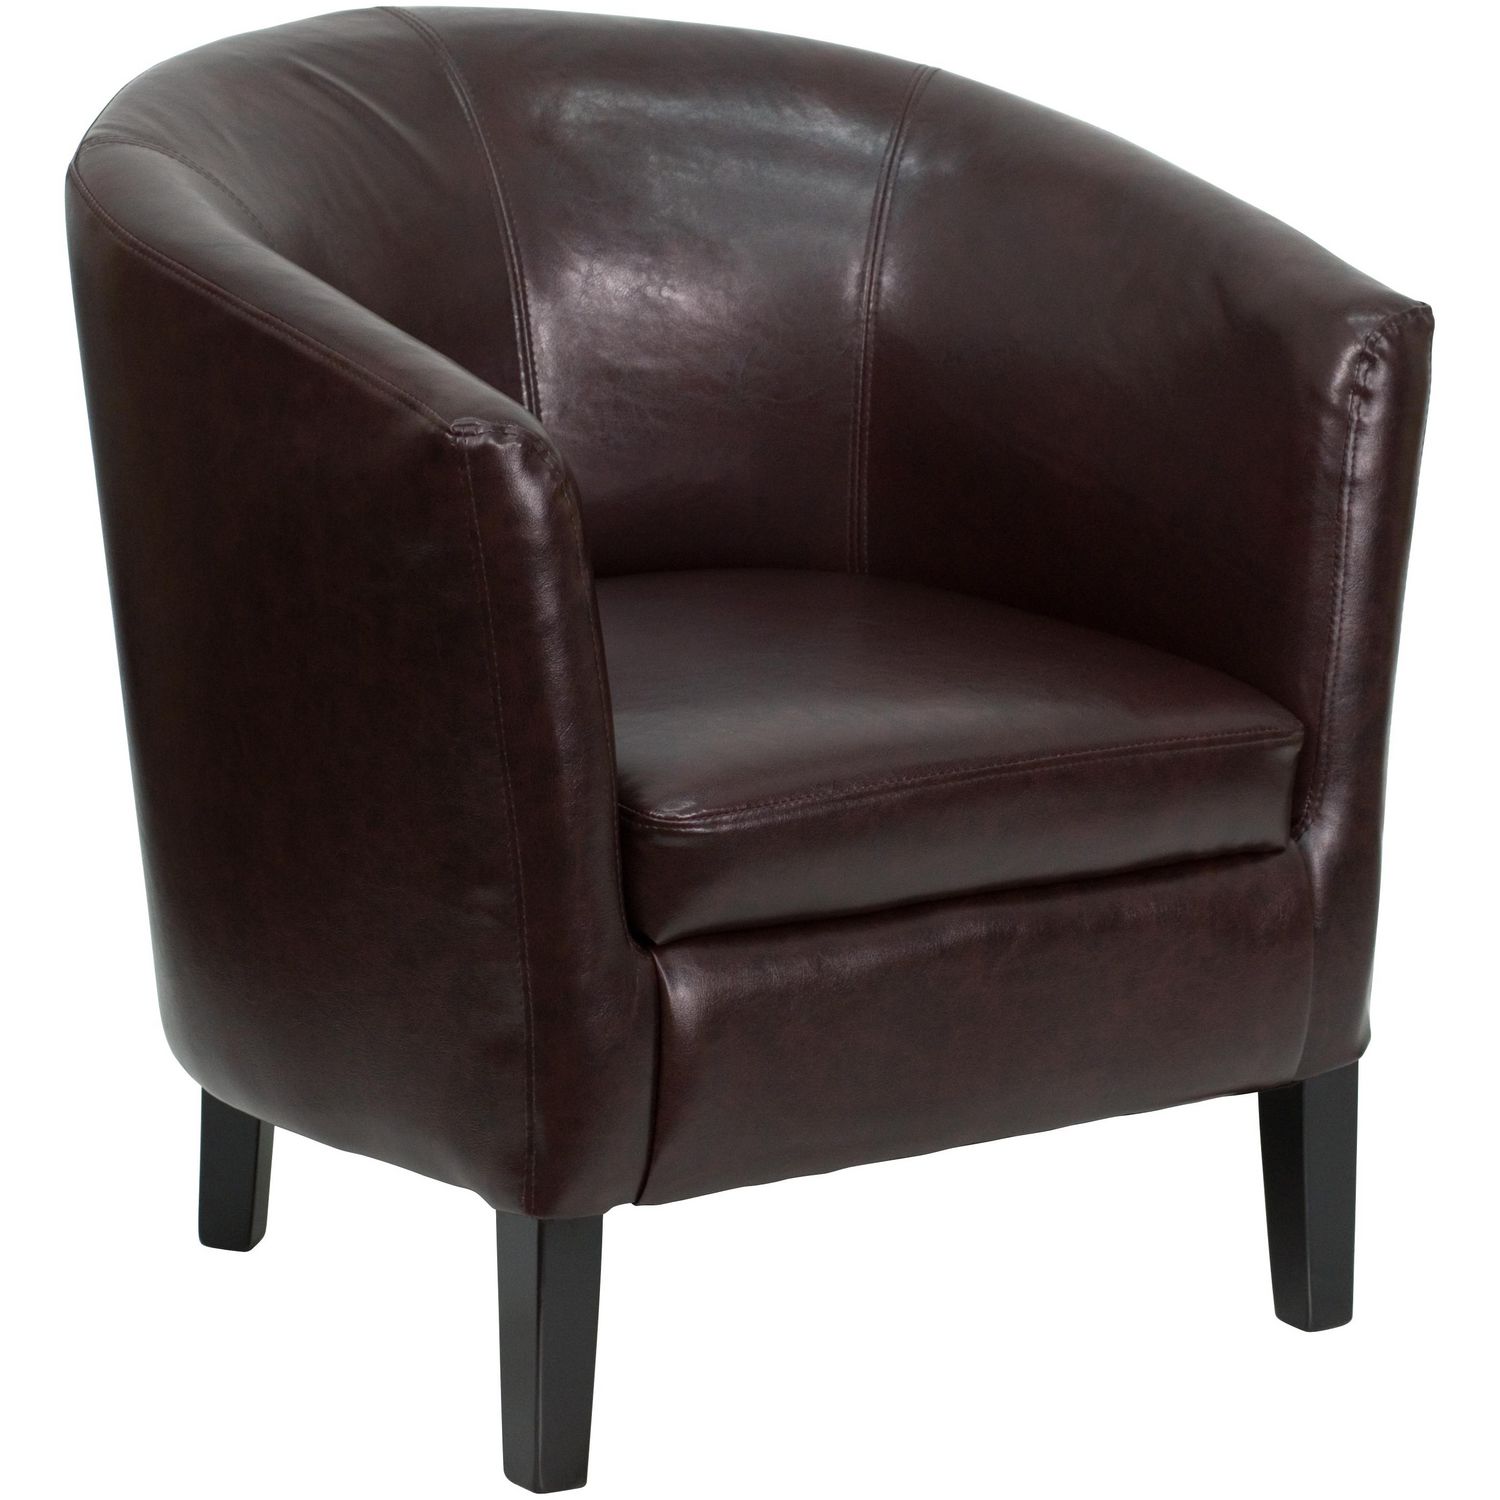 Brown Leather Barrel Shaped Guest Chair, Brown Leather Barrel Chair